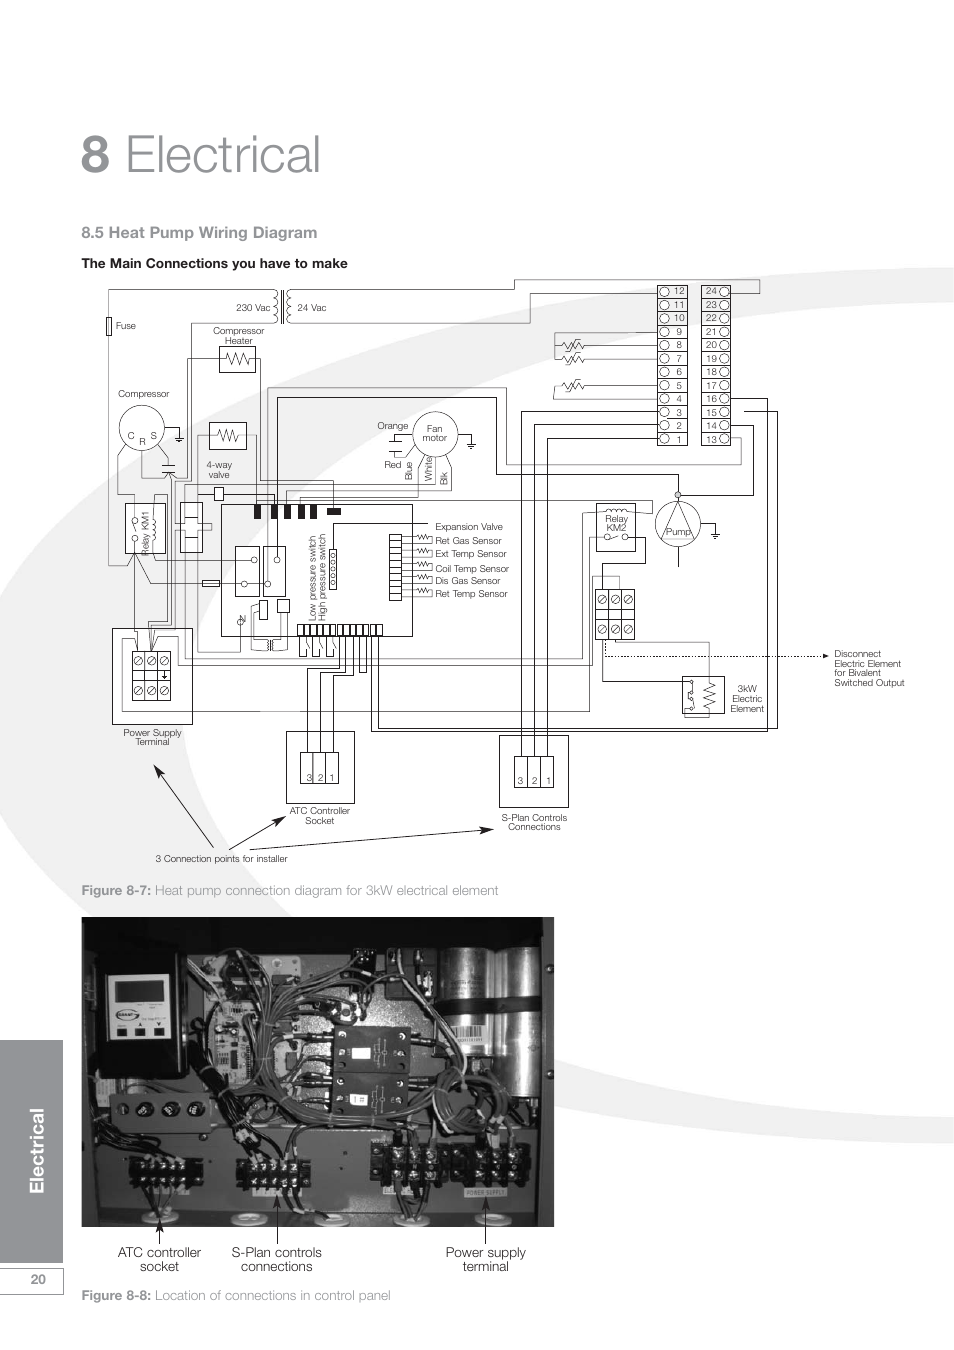 8 electrical, Electrical, 5 heat pump wiring diagram | Grant Products HPAW155 User Manual | Page 24 / 50